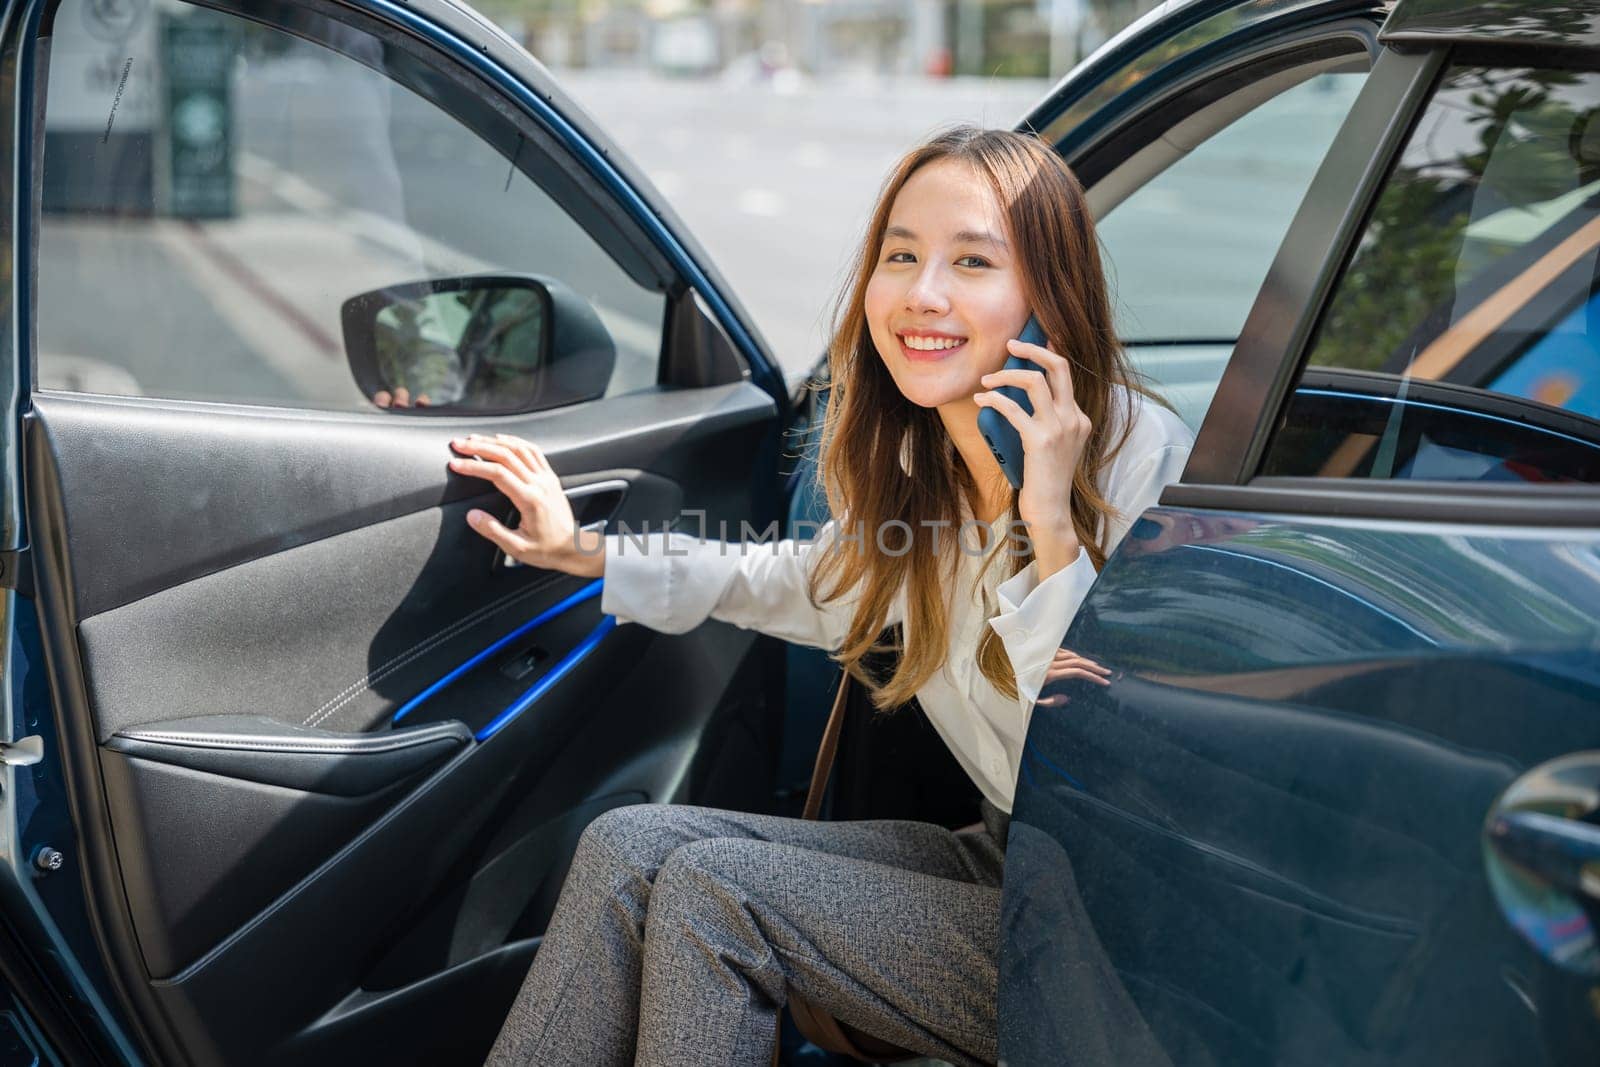 An Asian businesswoman, seated in her luxury car, smiles as she gets a new contract over the phone. Her open car door symbolizes the doorway to business success in the modern city.